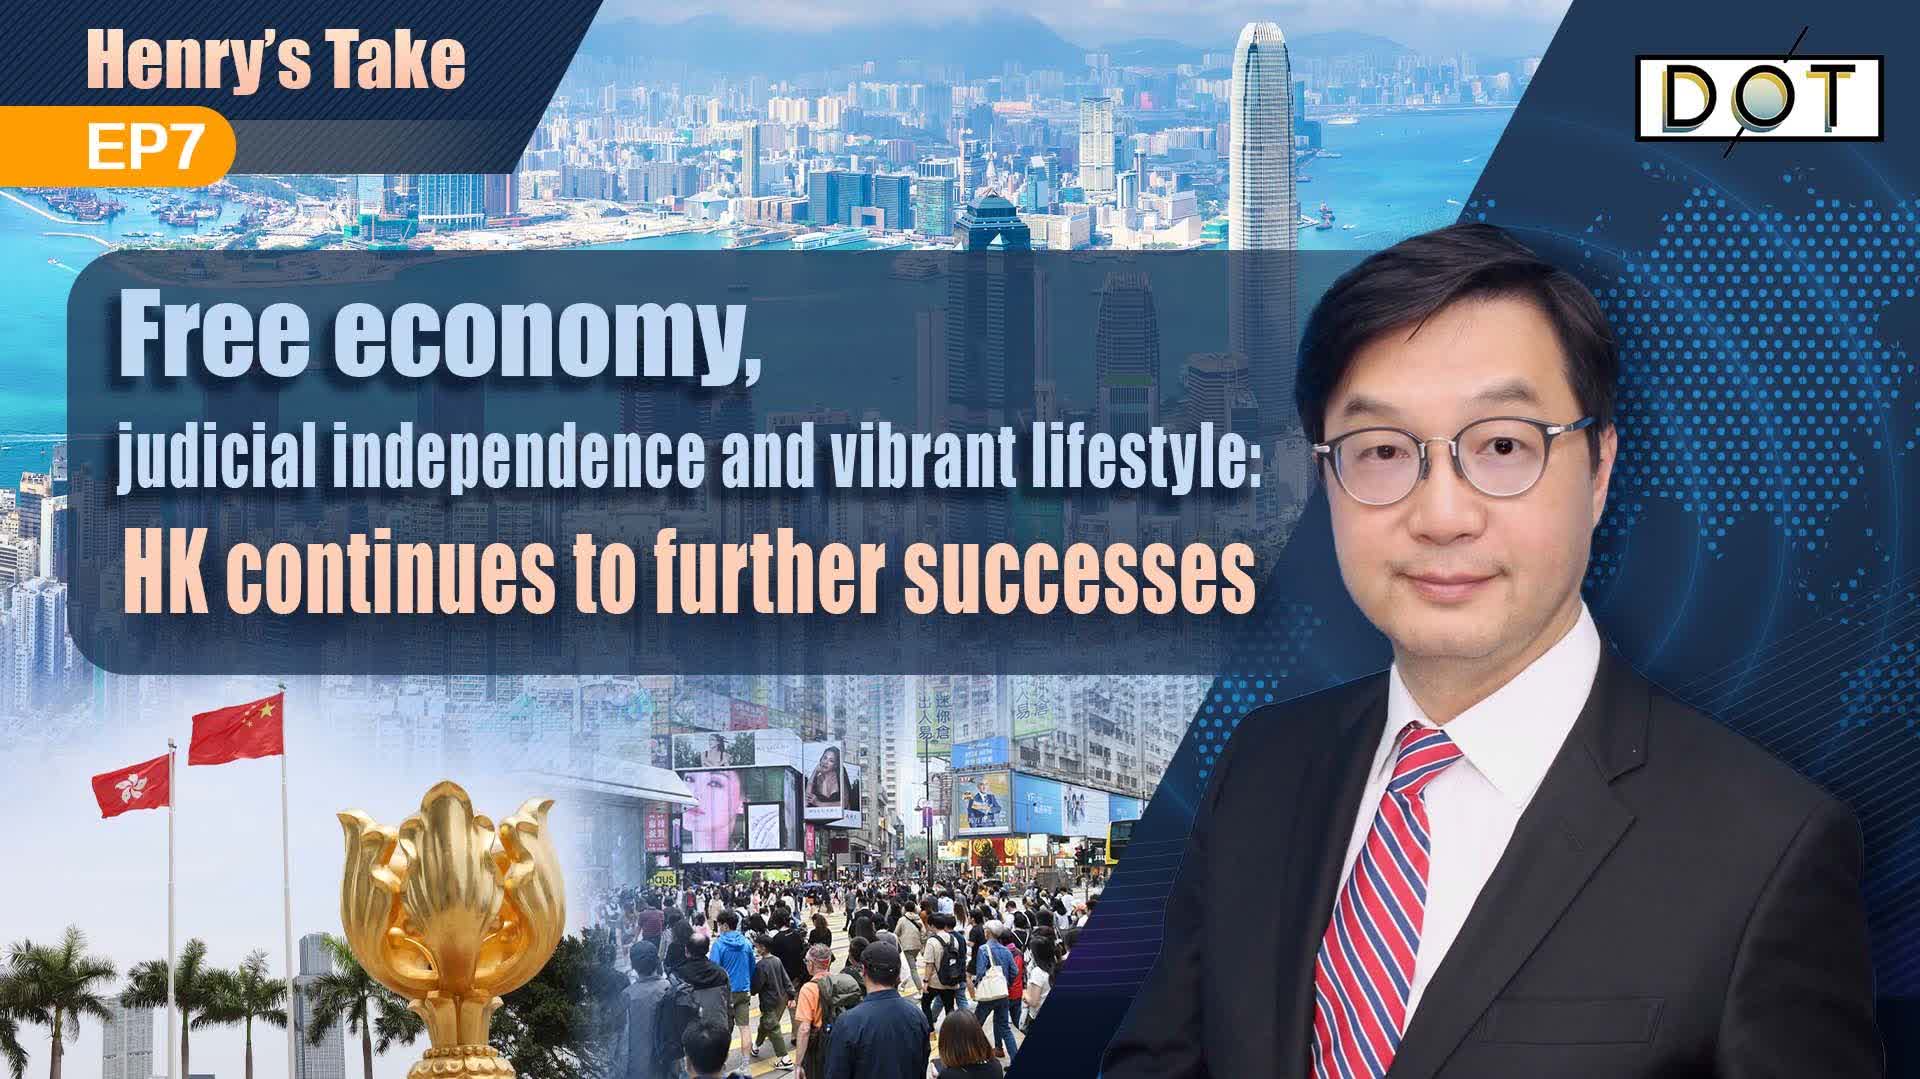 Henry's Take EP7 | Free economy, judicial independence and vibrant lifestyle: HK continues to further successes